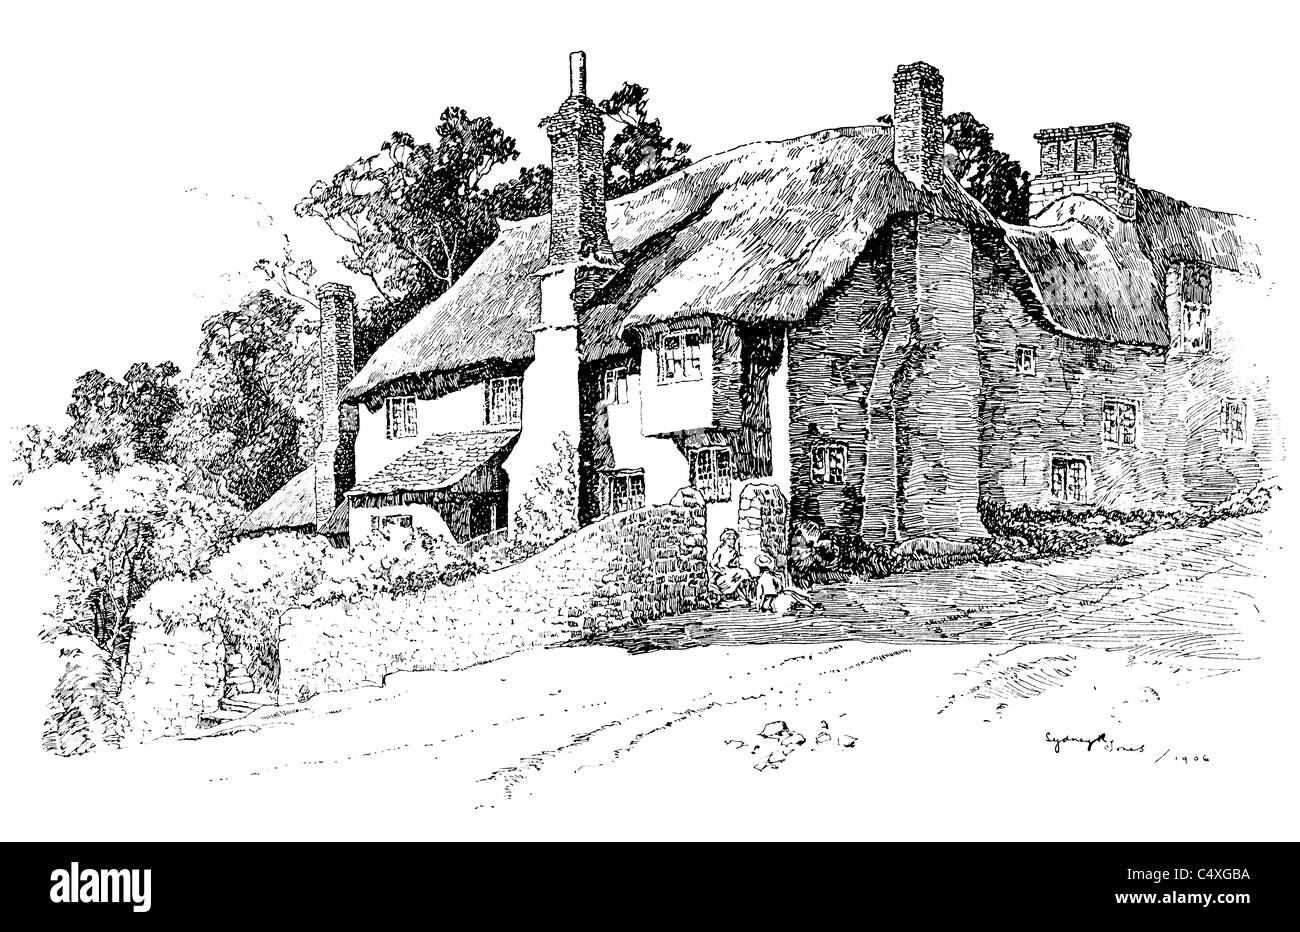 Thurlestone, Devonshire - pen and ink illustration from 'Old English Country Cottages' by Charles Holme, 1906. Stock Photo